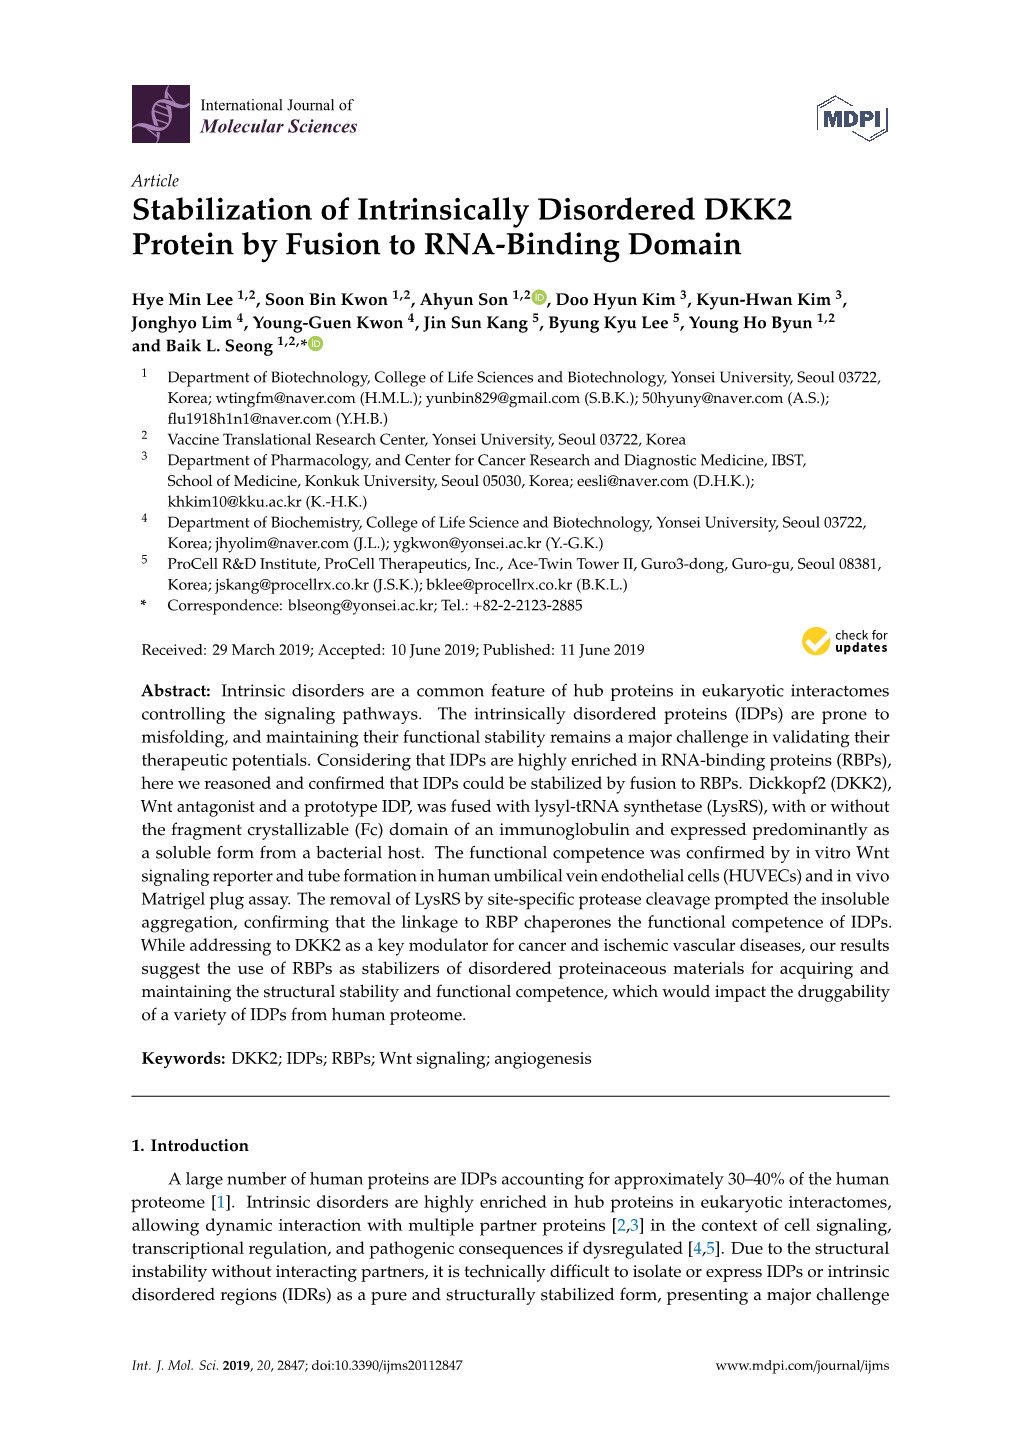 Stabilization of Intrinsically Disordered DKK2 Protein by Fusion to RNA-Binding Domain